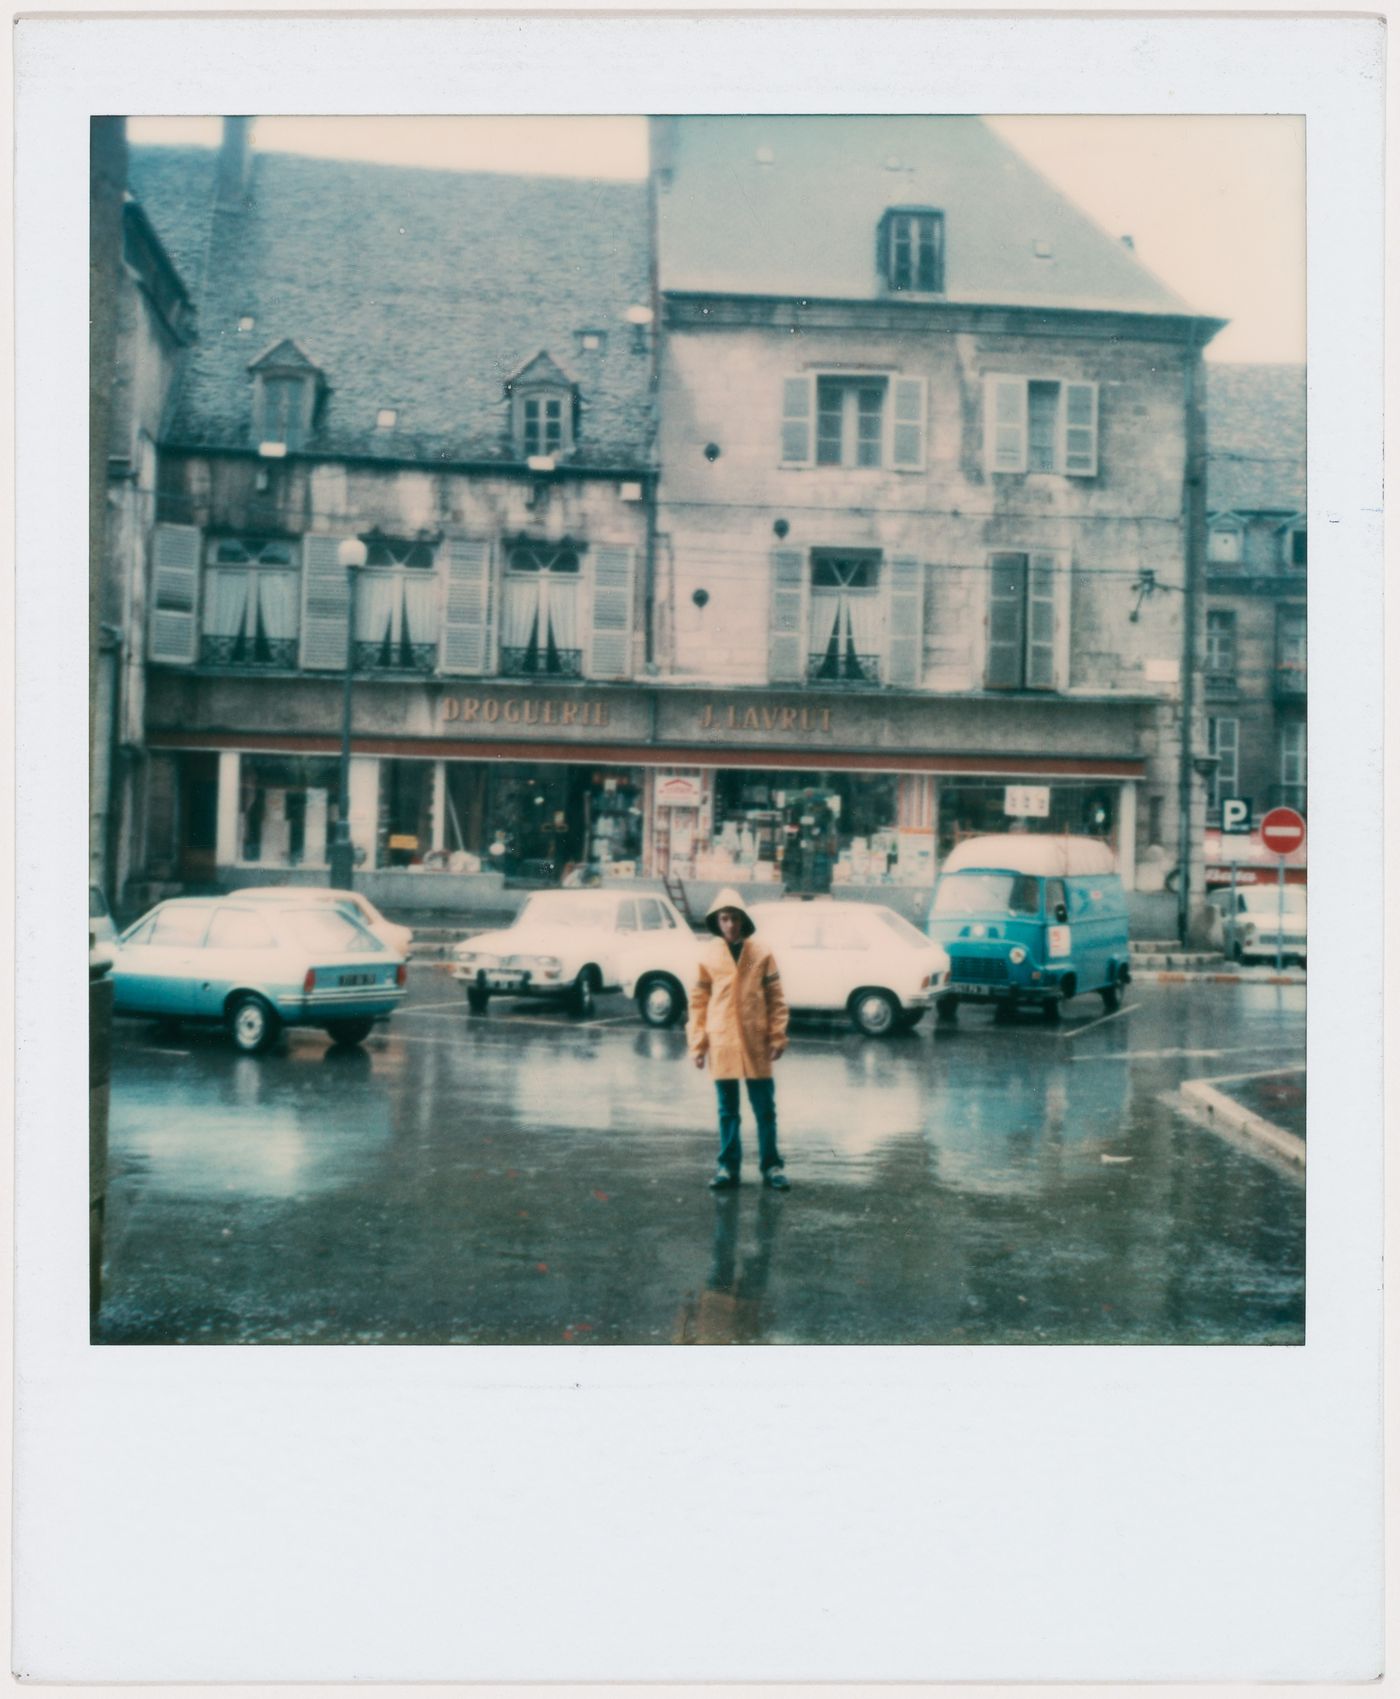 Buildings and parking lot with young boy, Dole, France